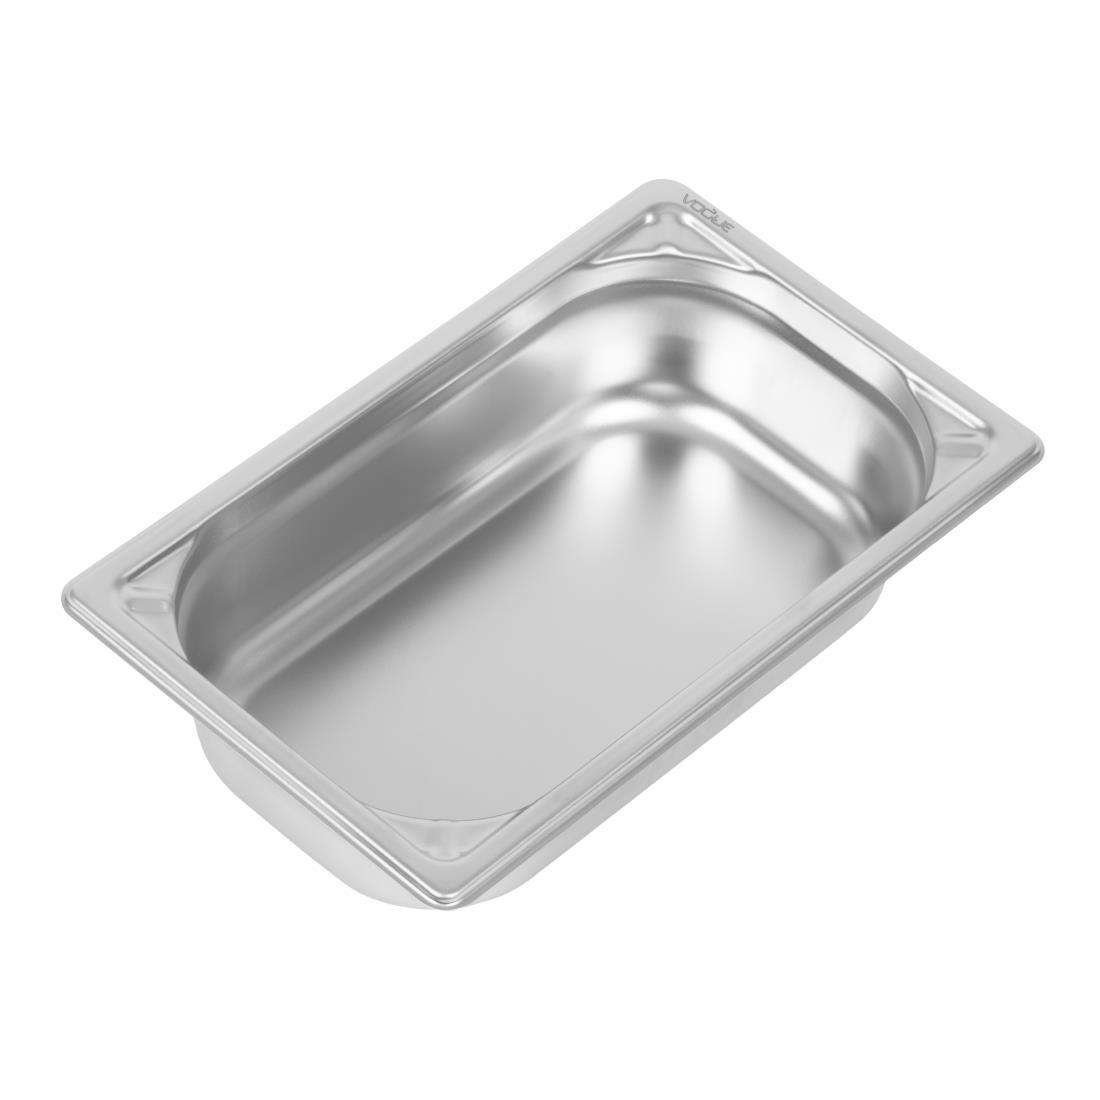 Vogue Heavy Duty Stainless Steel 1/4 Gastronorm Pan 65mm - DW446  - 1